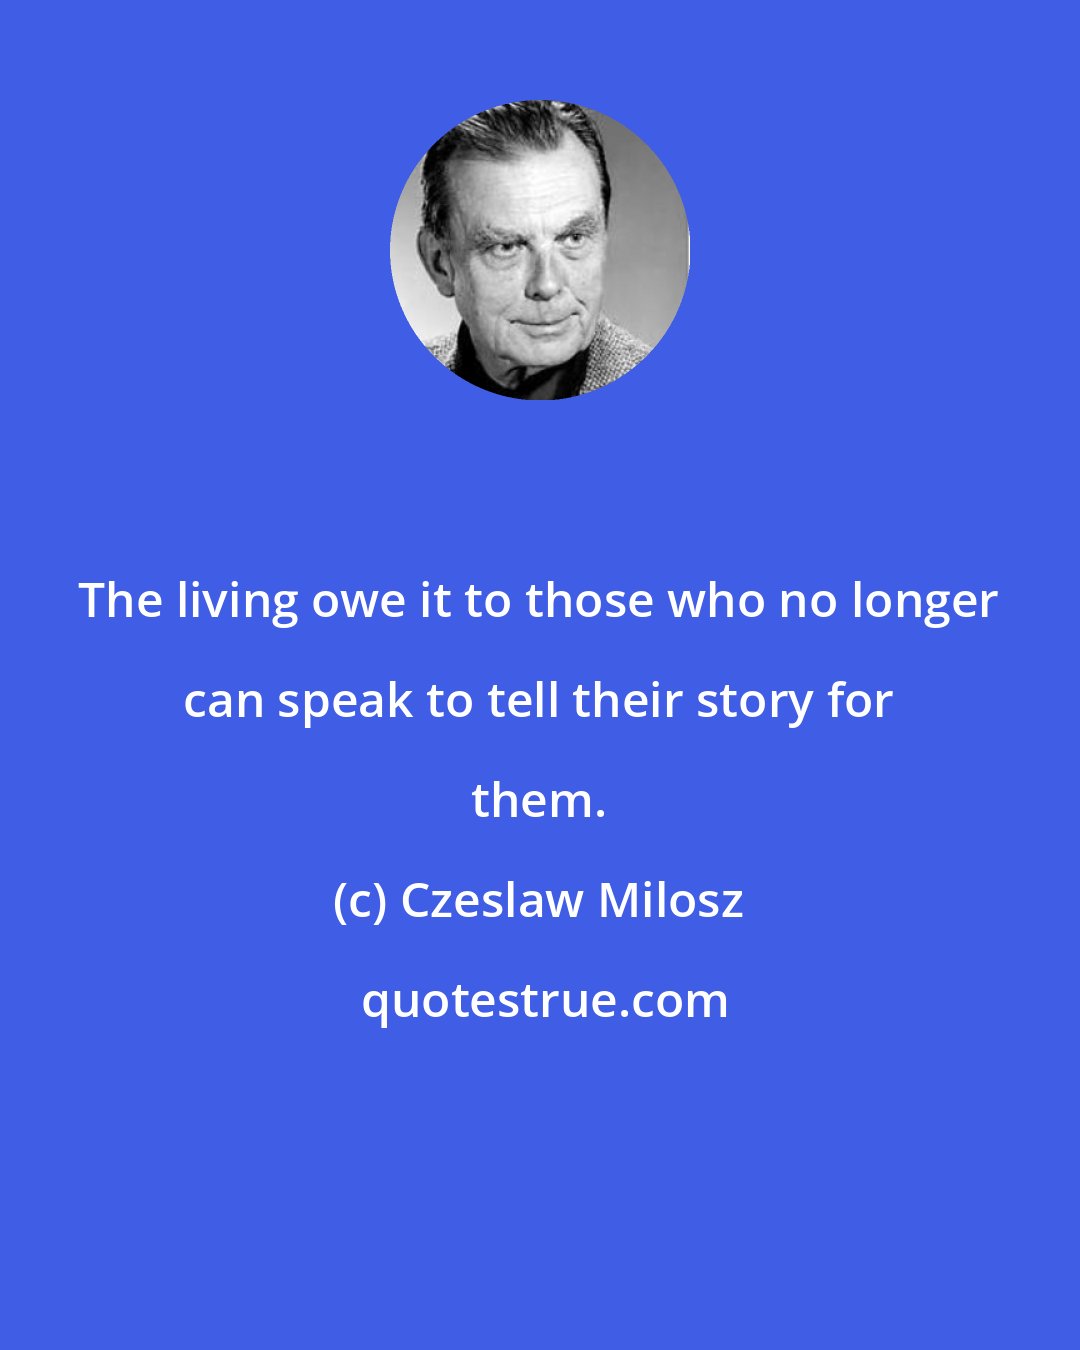 Czeslaw Milosz: The living owe it to those who no longer can speak to tell their story for them.